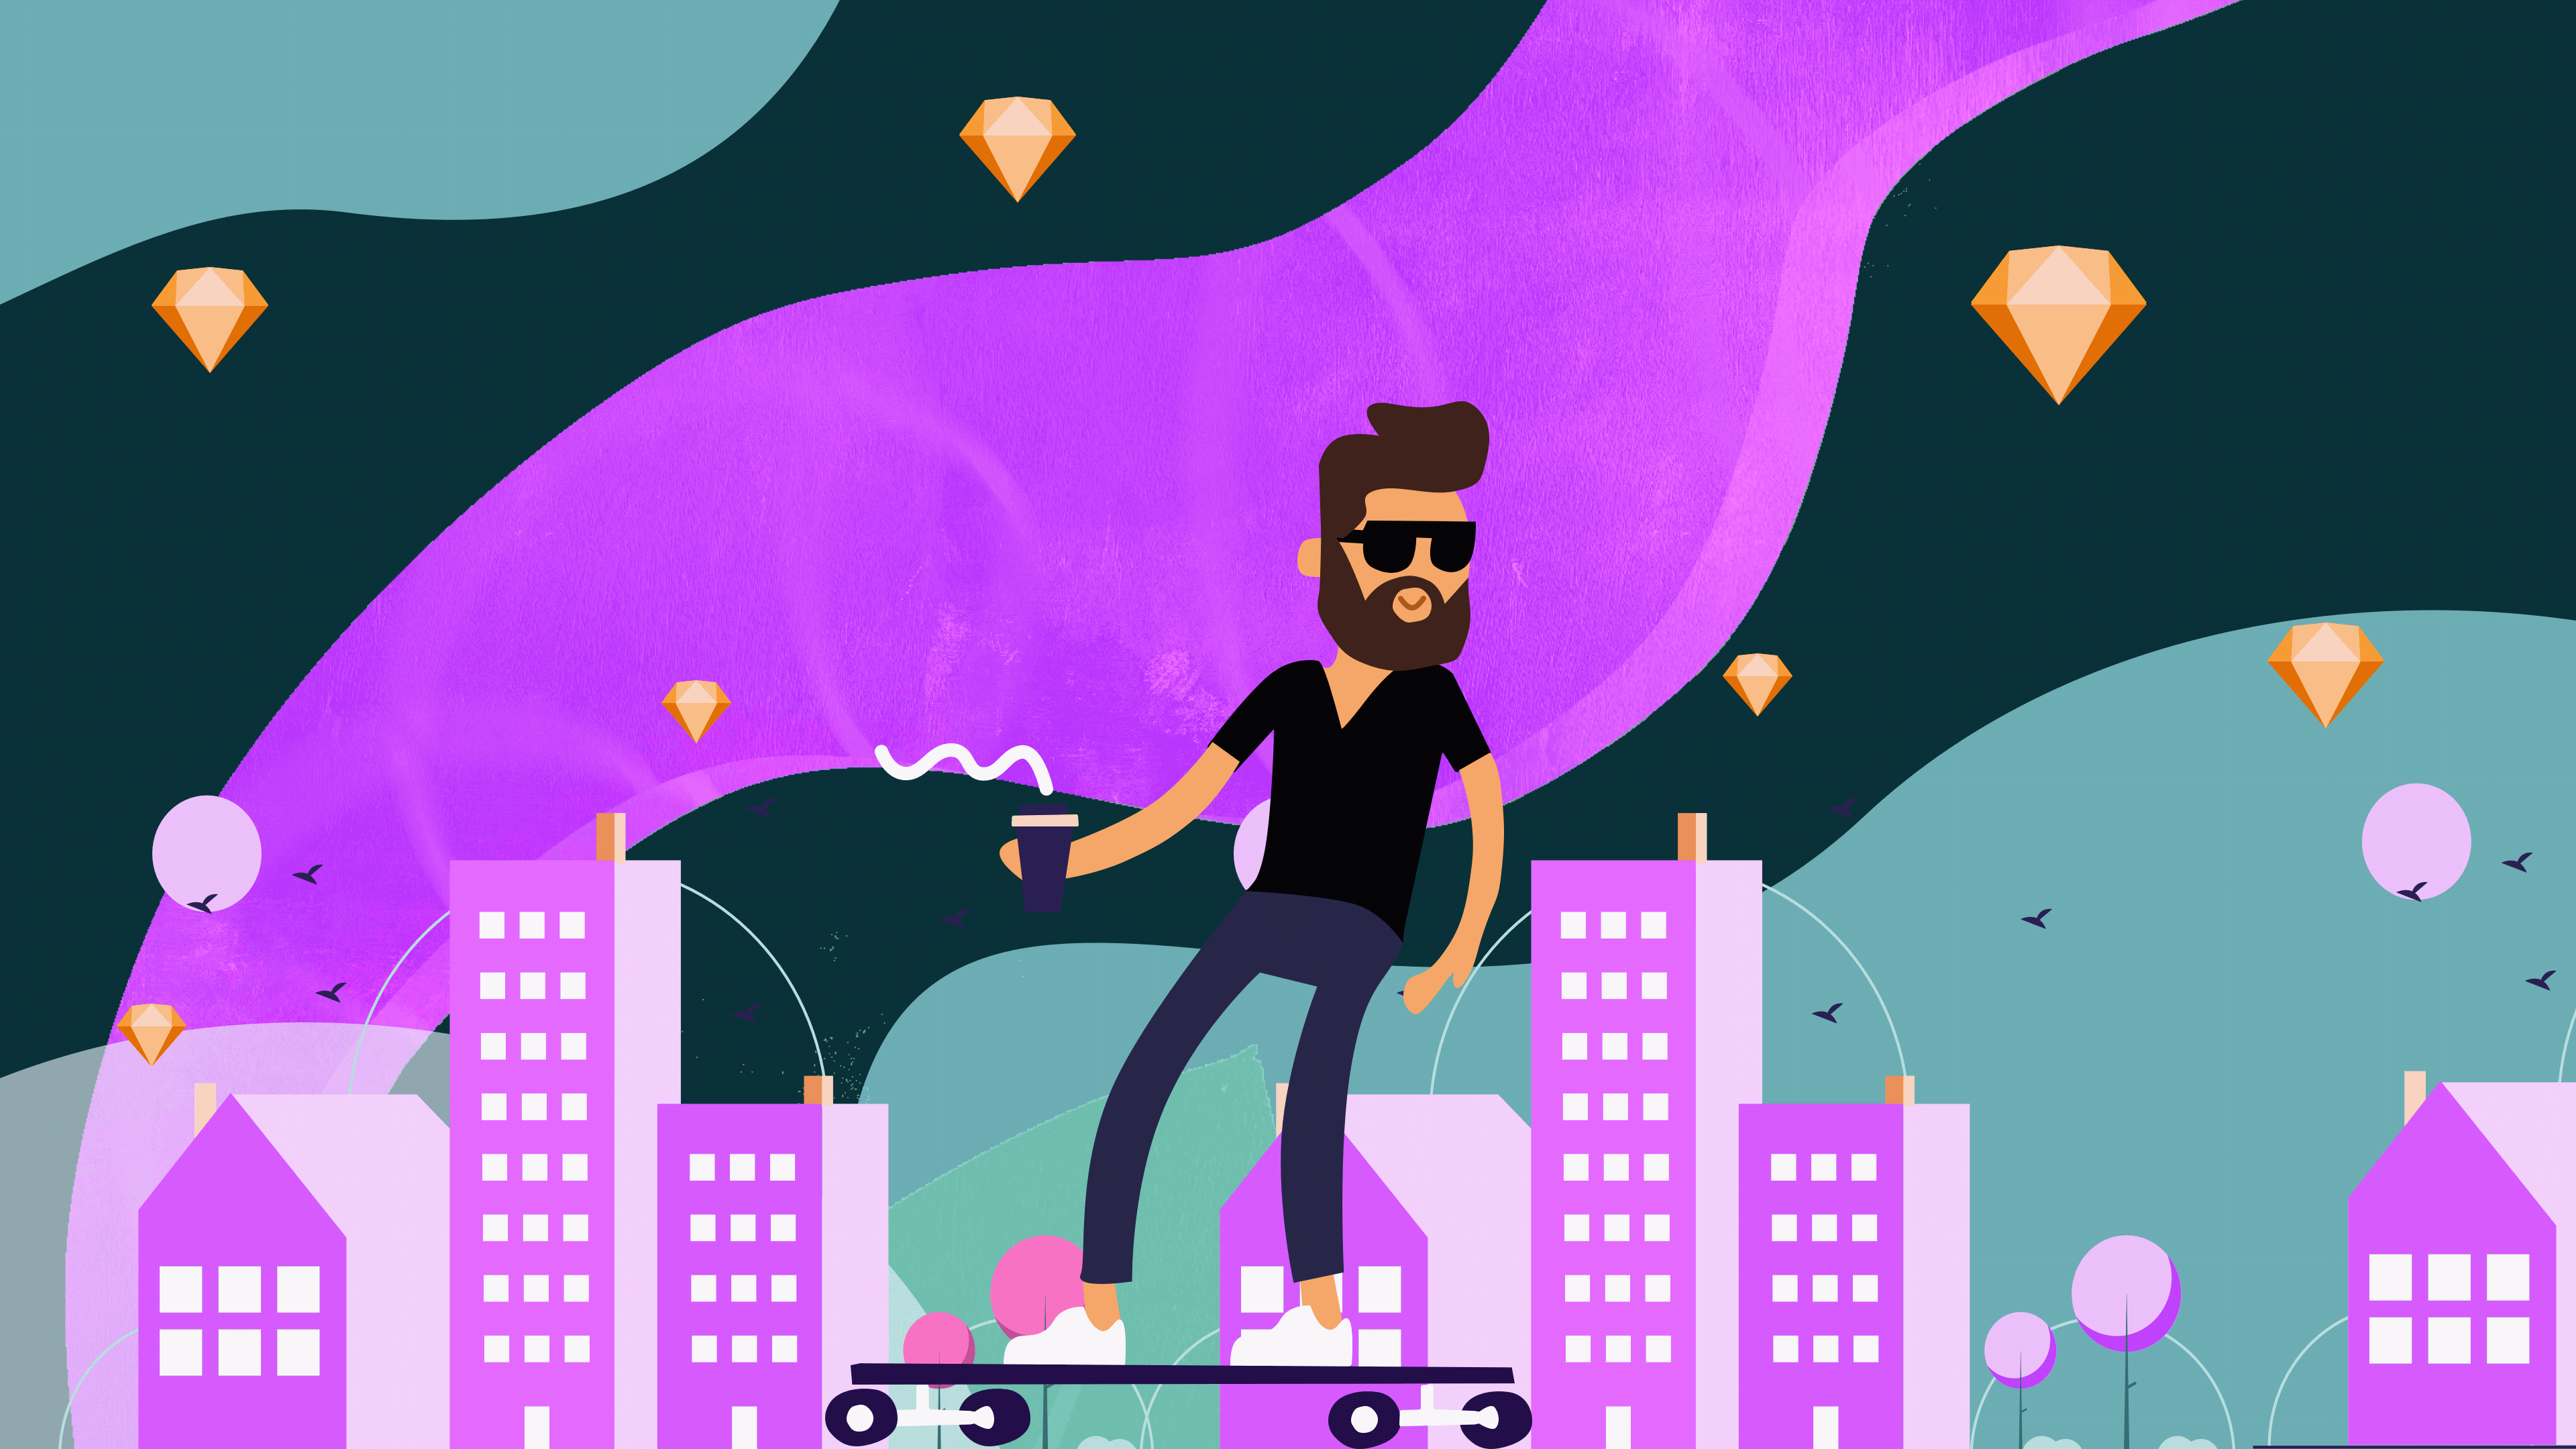 An animation of a man riding a skateboard in a city setting with Sketch icons bouncing in the background.